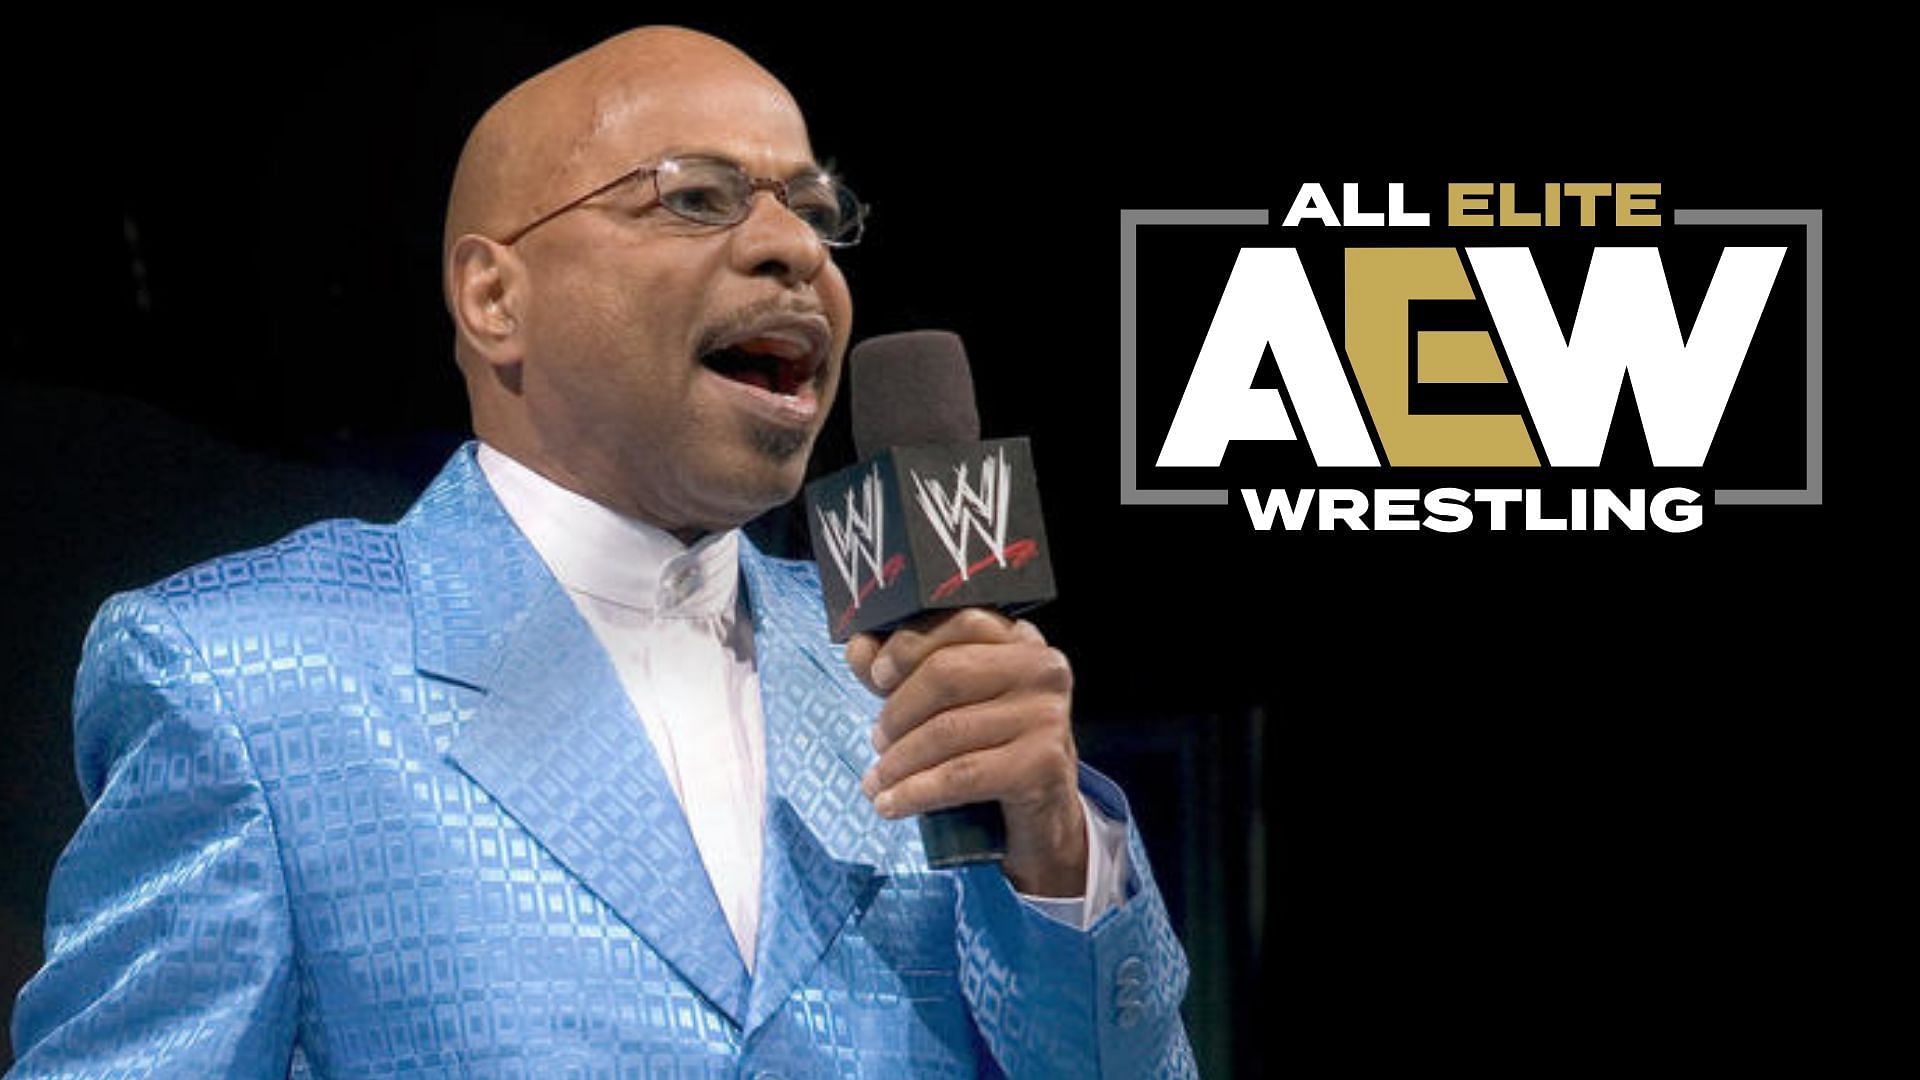 AEW has apparently offended Teddy Long